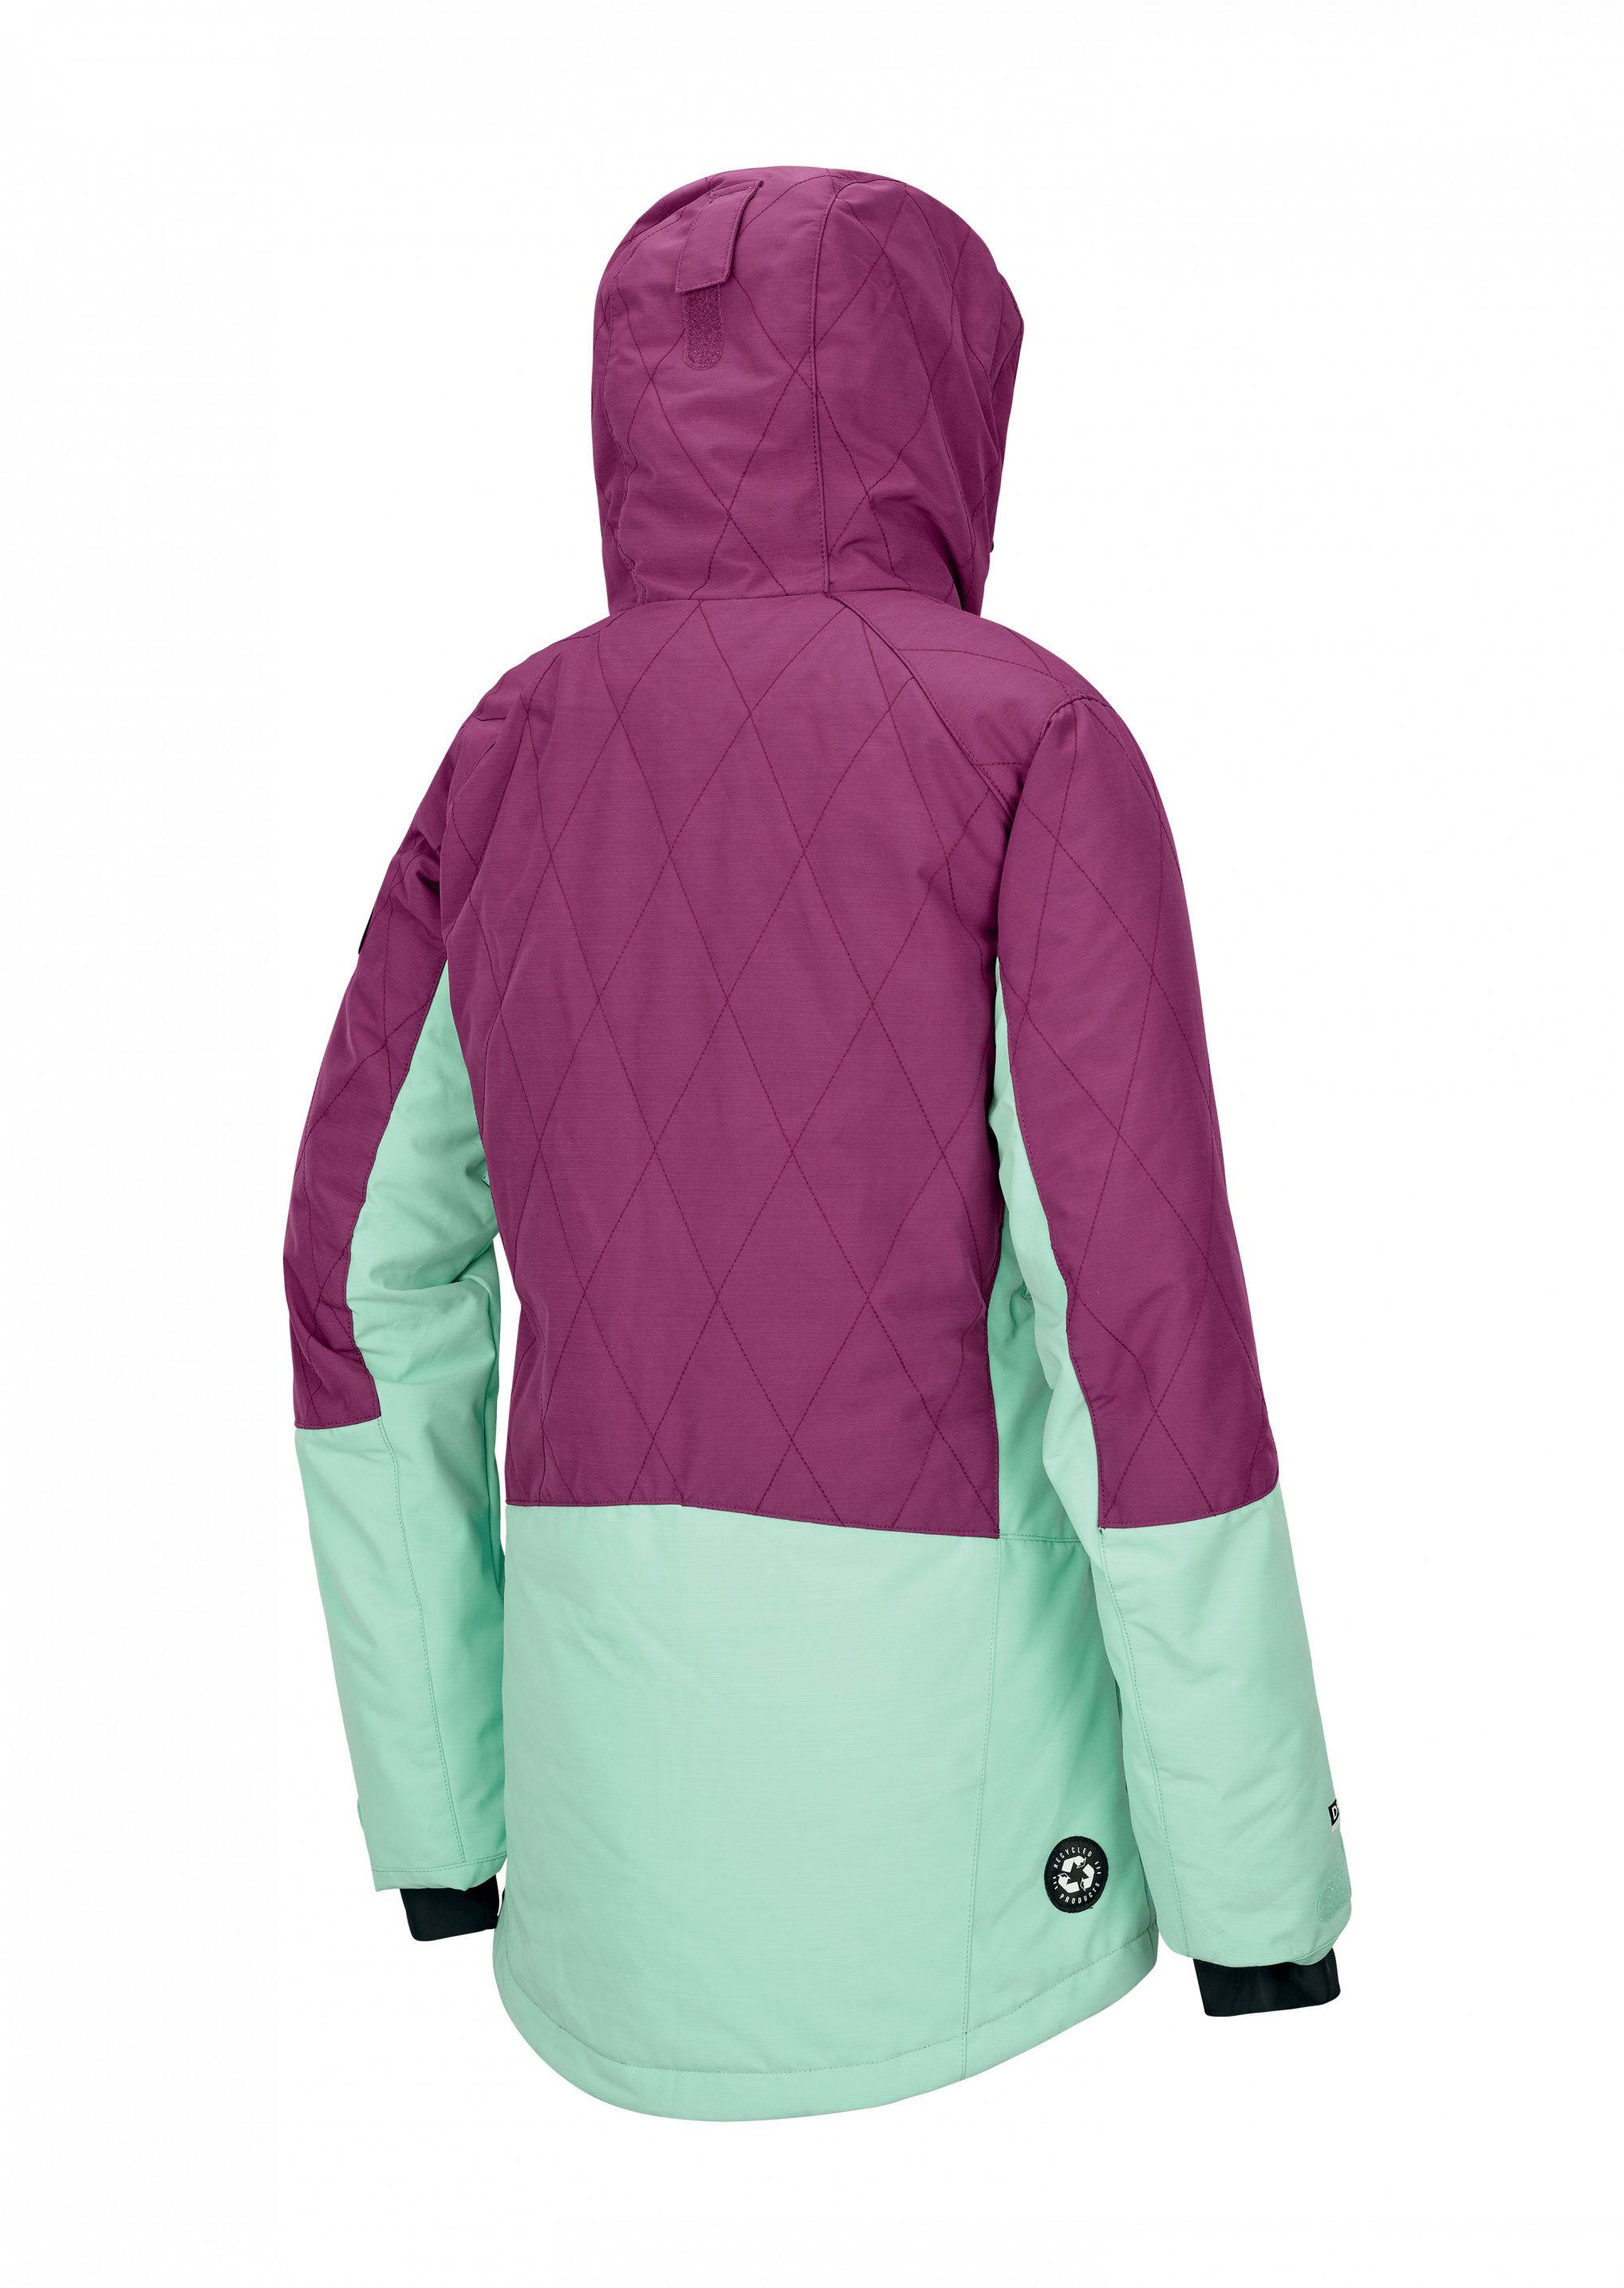 Picture Organic Clothing Mineral Jacket Women’s Raspberry L